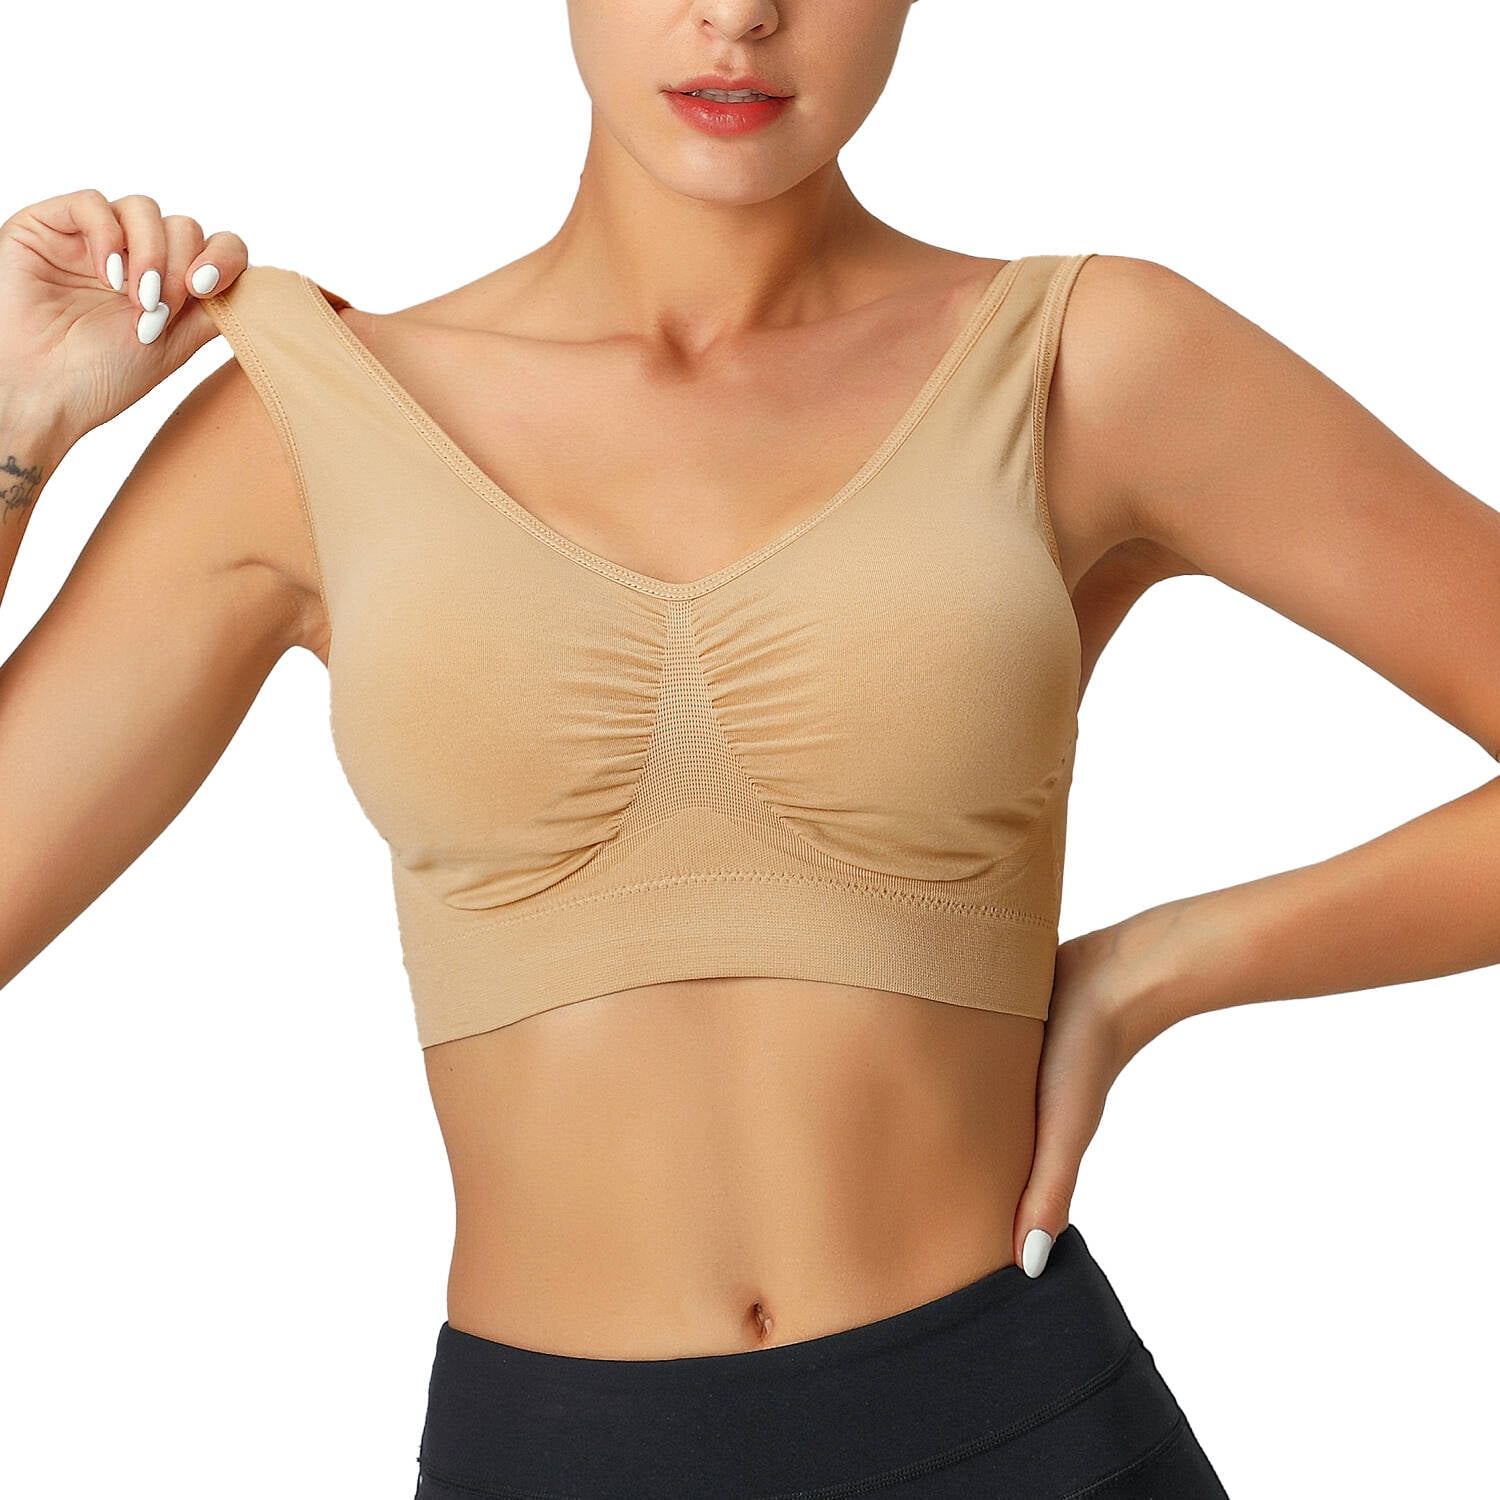 AGONVIN Women's High Impact Support Wirefree Bounce Control Plus Size  Workout Sports Bra Beige 38G 